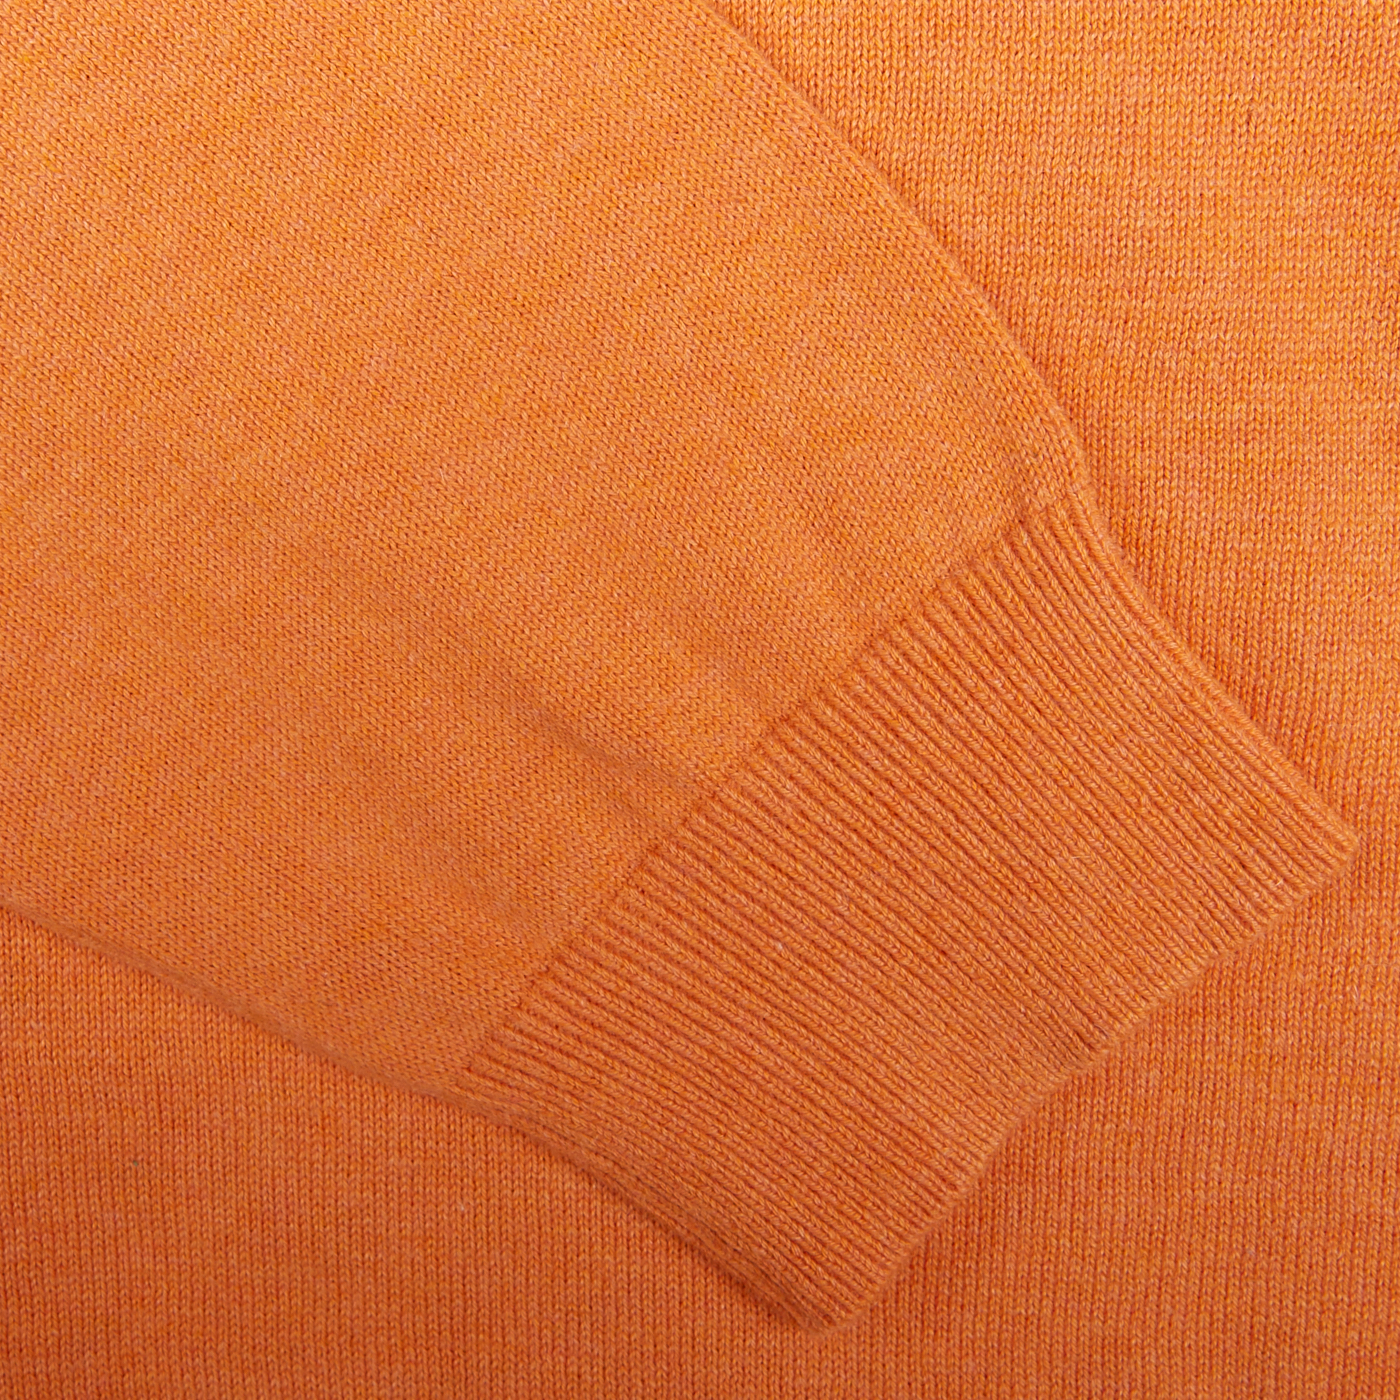 Close-up of a Blazing Orange Luxury Cotton Crewneck fabric, knitted in cotton mixed with cashmere, with ribbed cuff detail by Alan Paine.